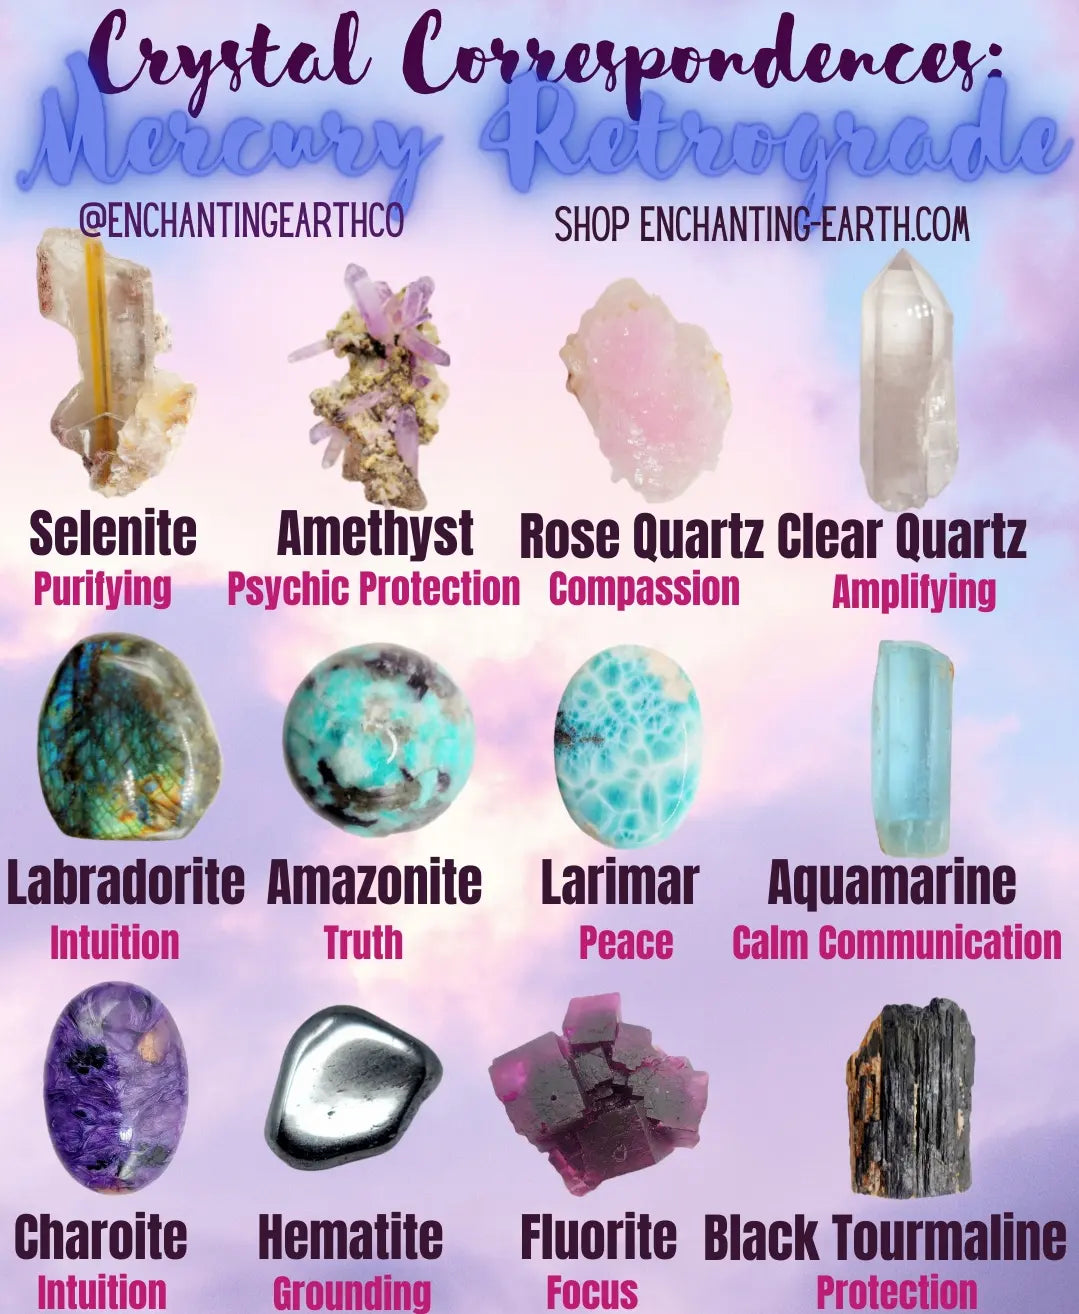 Mercury Retograde Crystal Set for Protection and Clear Communication